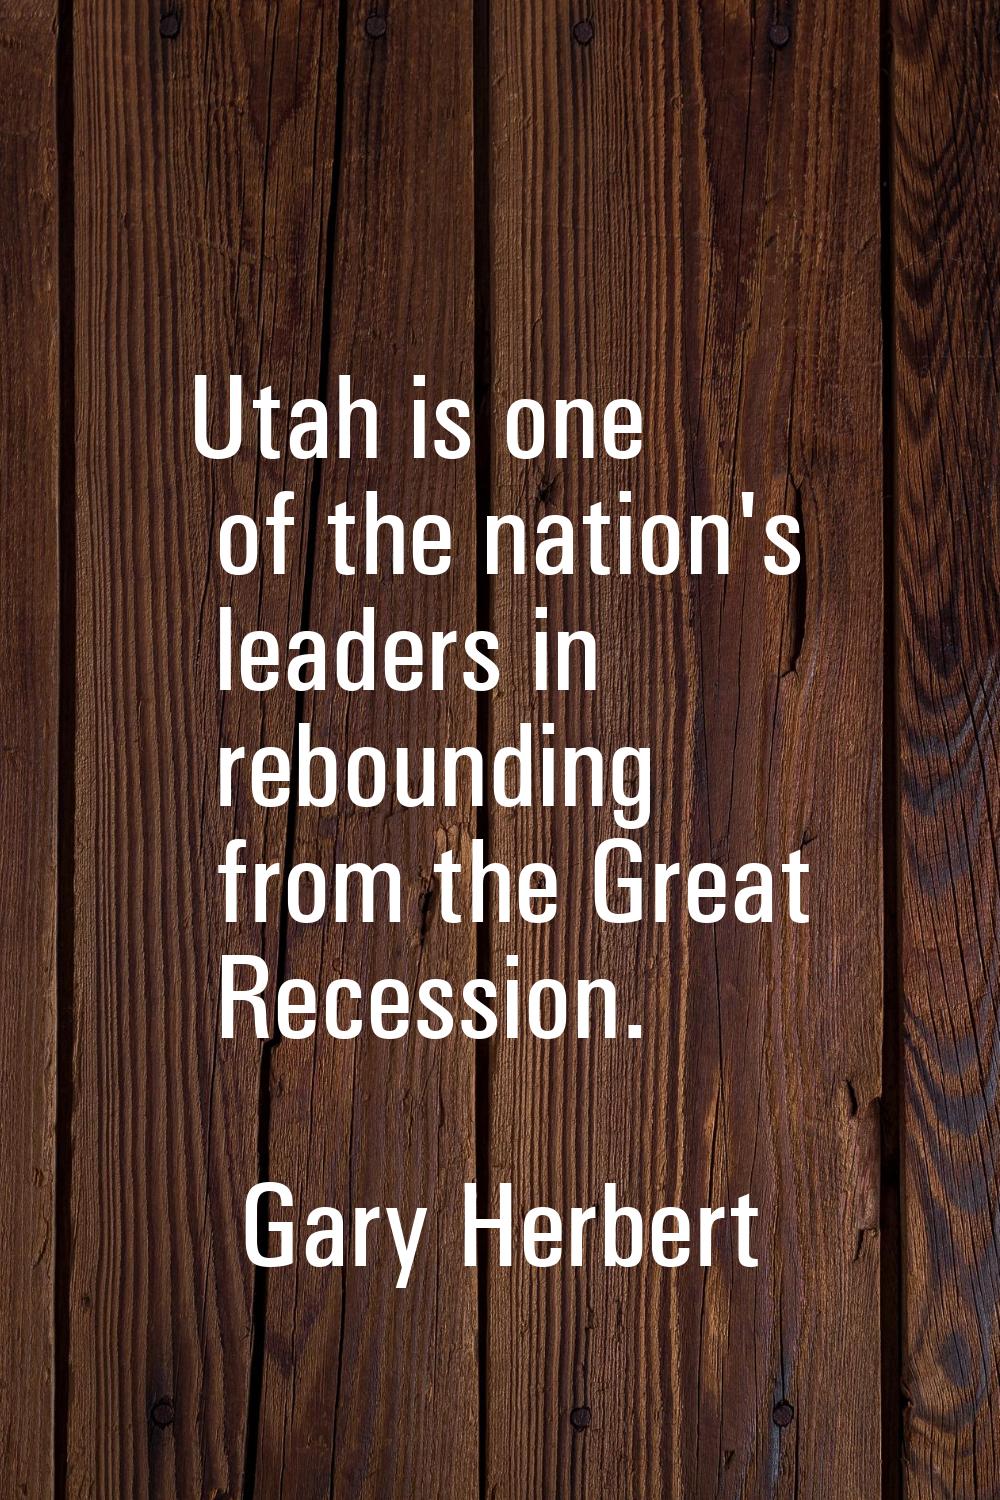 Utah is one of the nation's leaders in rebounding from the Great Recession.